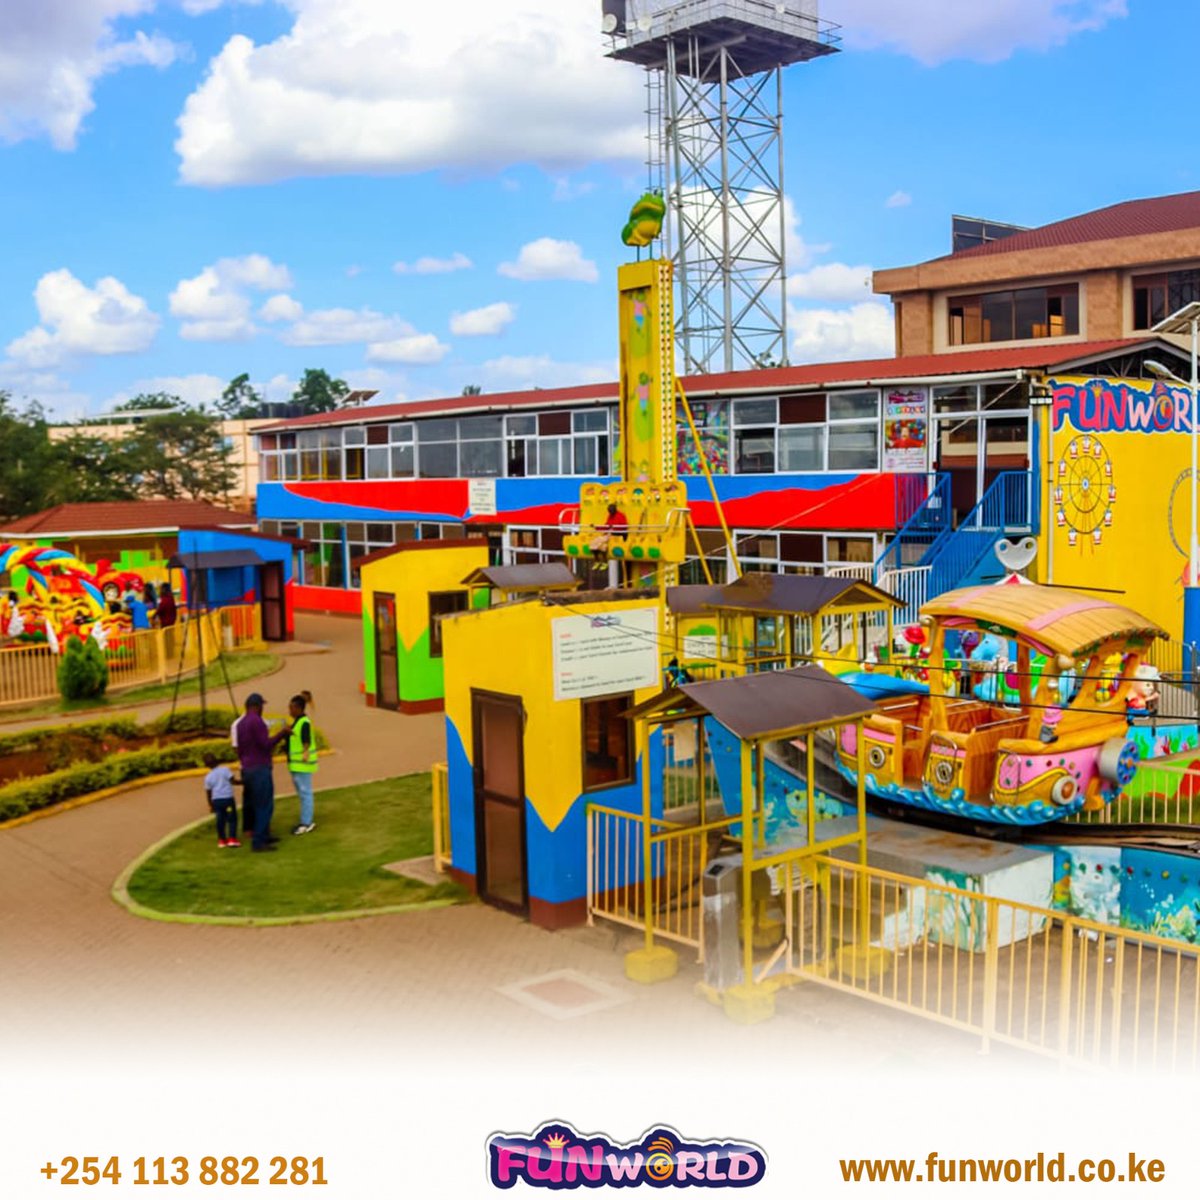 So many exciting rides, so little time. Lets host you anyday.

Find us at Juja City Mall Complex (Behind Naivas).
Contact us on +254 113 882 281.
Email: info@funworld.co.ke 
Website: funworld.co.ke 

#FunworldAmusementpark #TheFunworldExperience #RHONairobi